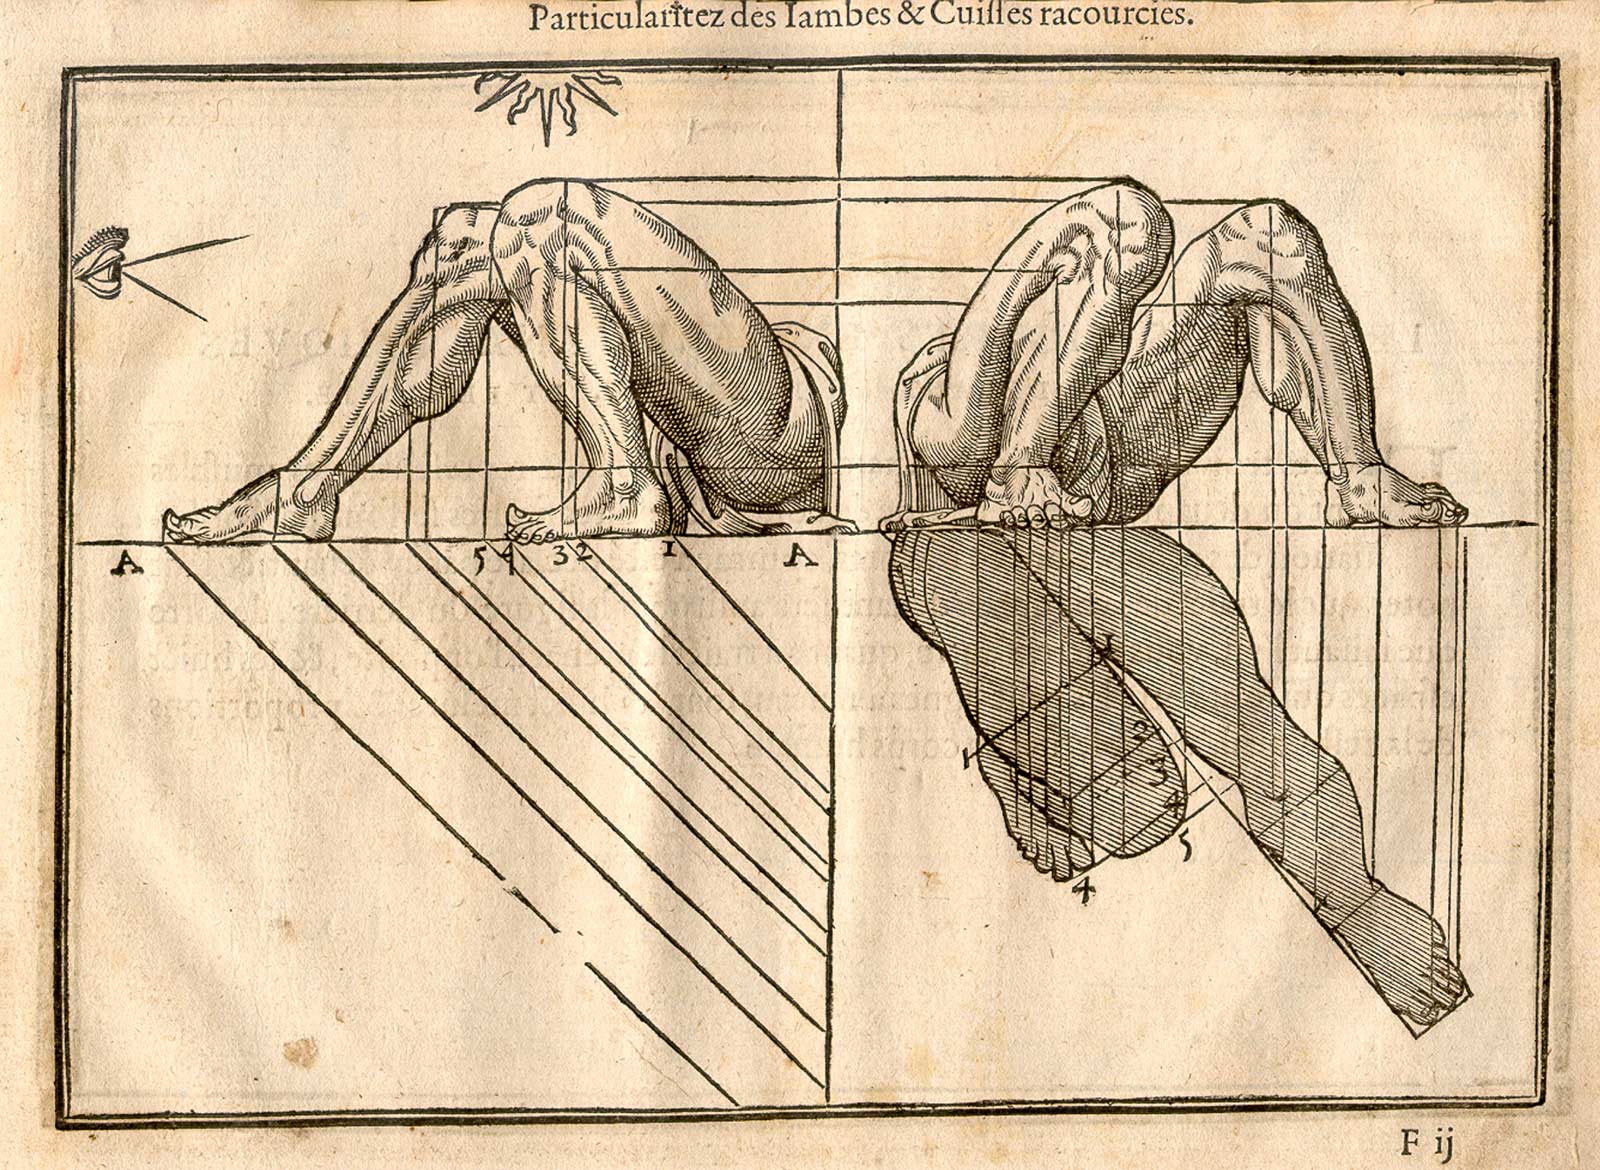 Woodcut illustration of three images of the musculature of the legs with bent knees viewed from the sides, with measured proportions of each shown, from Jehan Cousin’s Livre de pourtraiture, NLM Call no.: WZ 250 C8673L 1608.